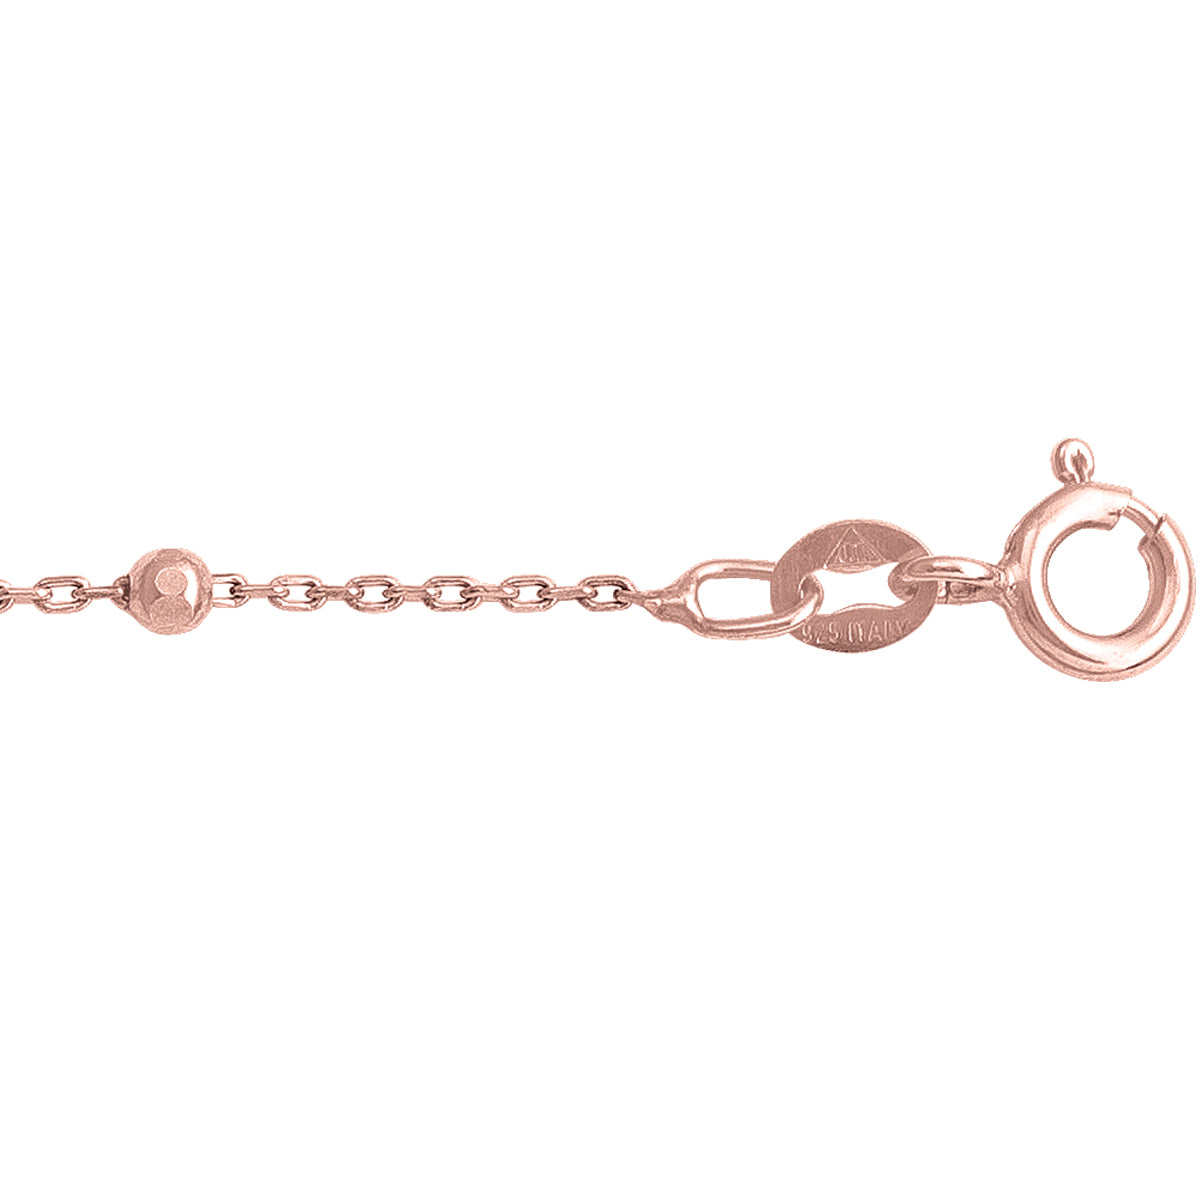 CHAINS SILVER PINK STATION BEAD 